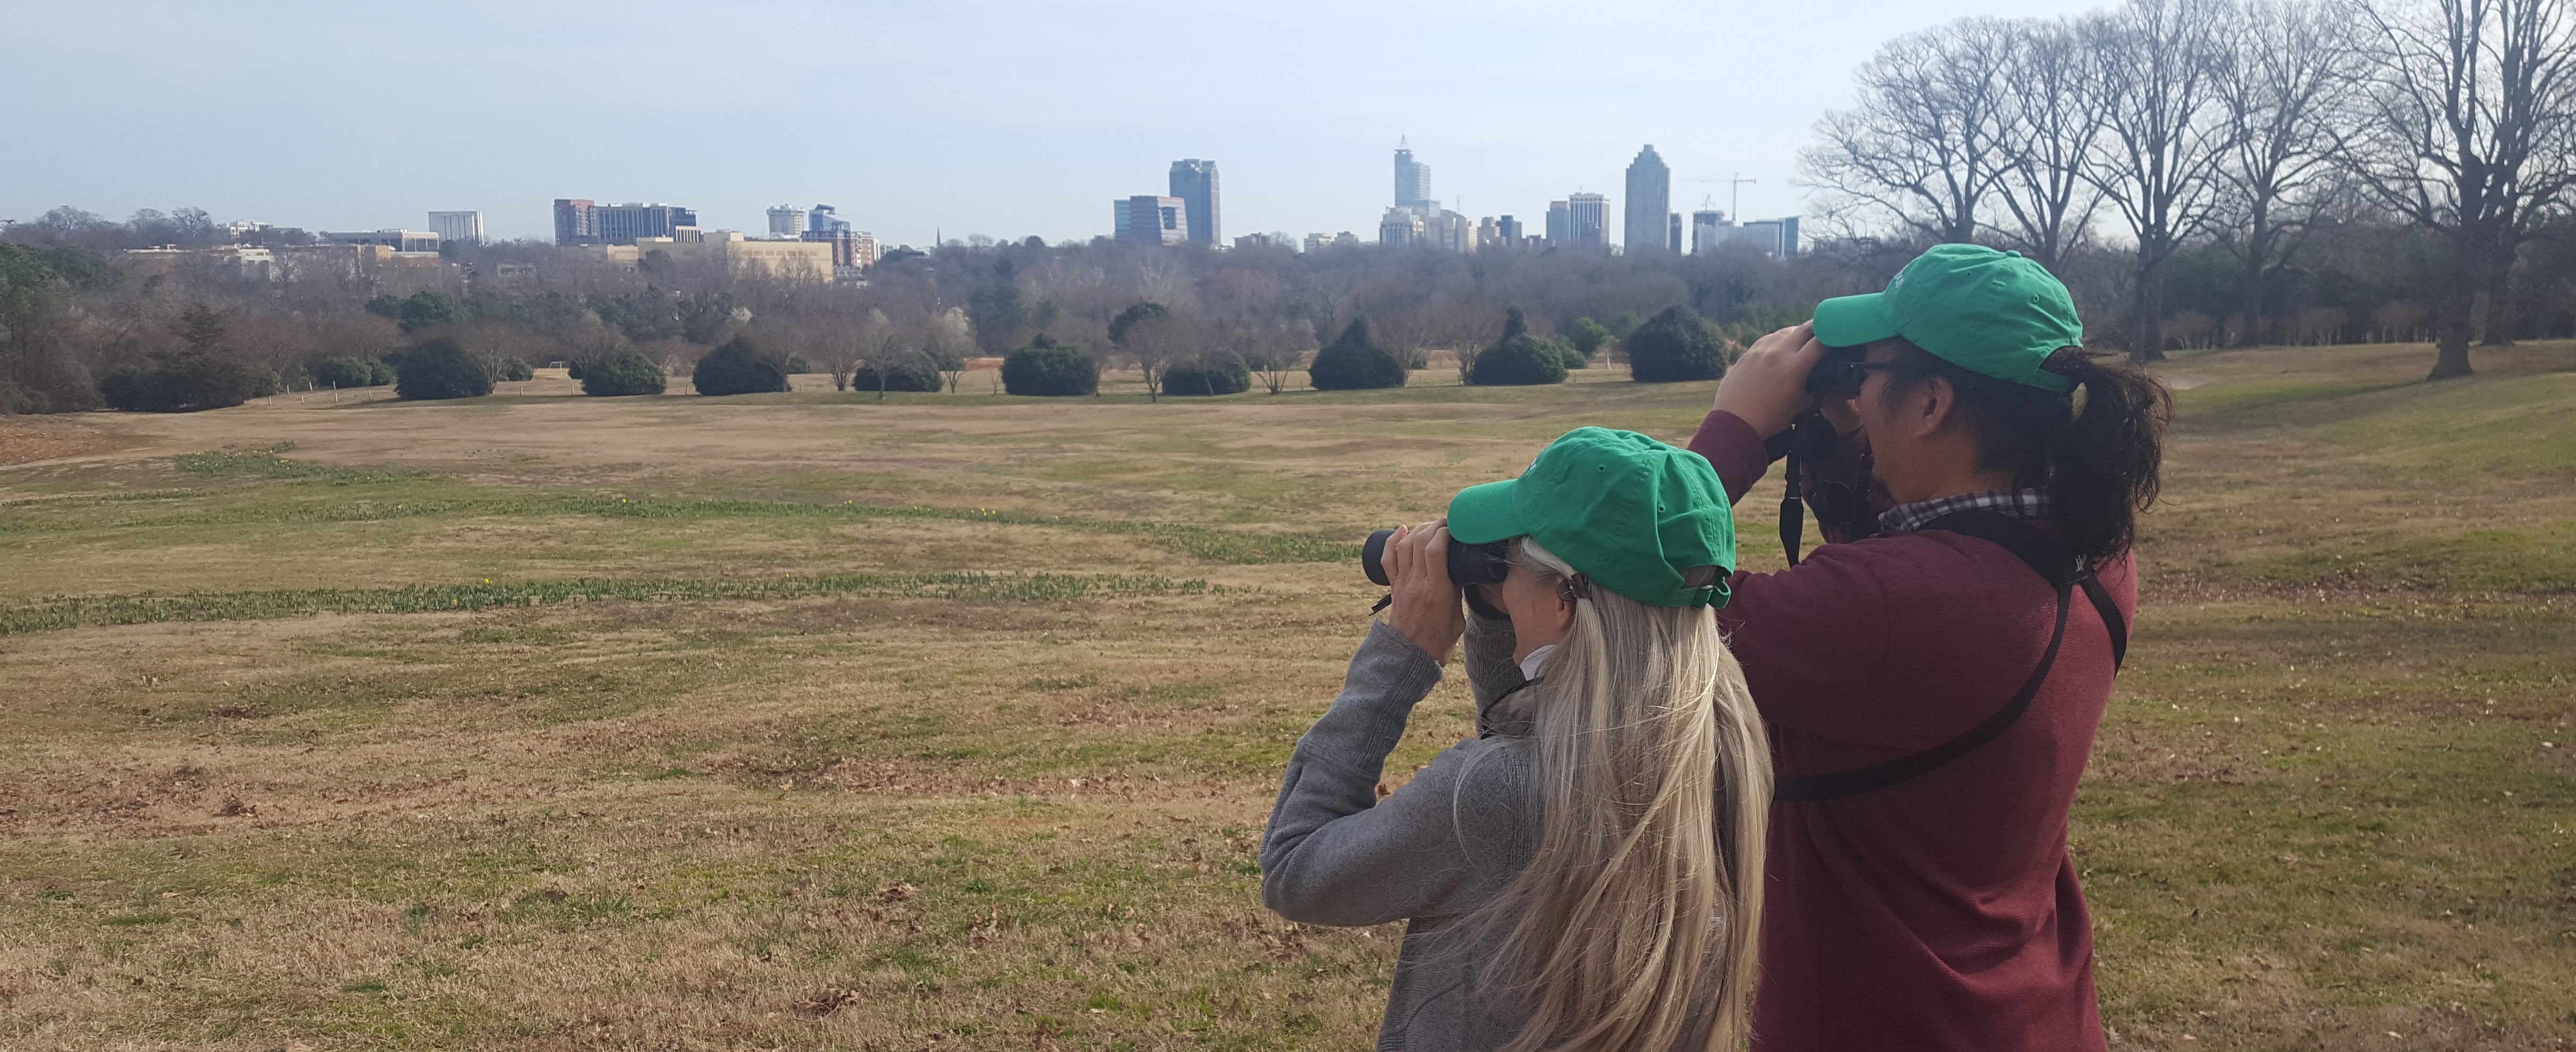 A man and a woman with binoculars Bird Watching at Dix Park